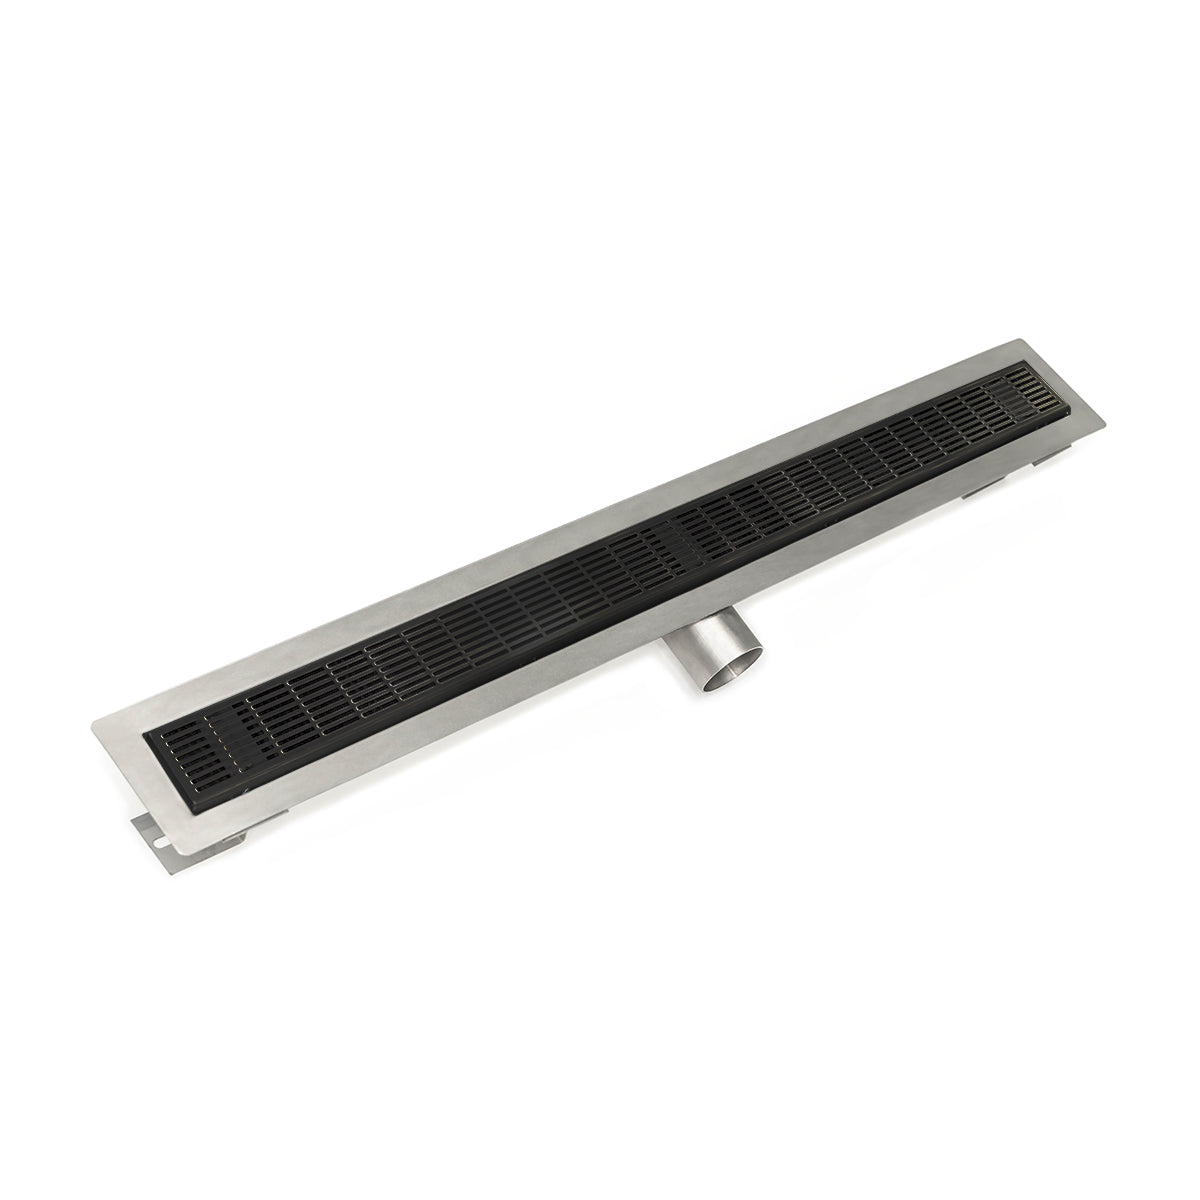 Infinity Drain 48" FT Series Side Outlet Linear Drain Kit with 2 1/2" Perforated Slotted Grate